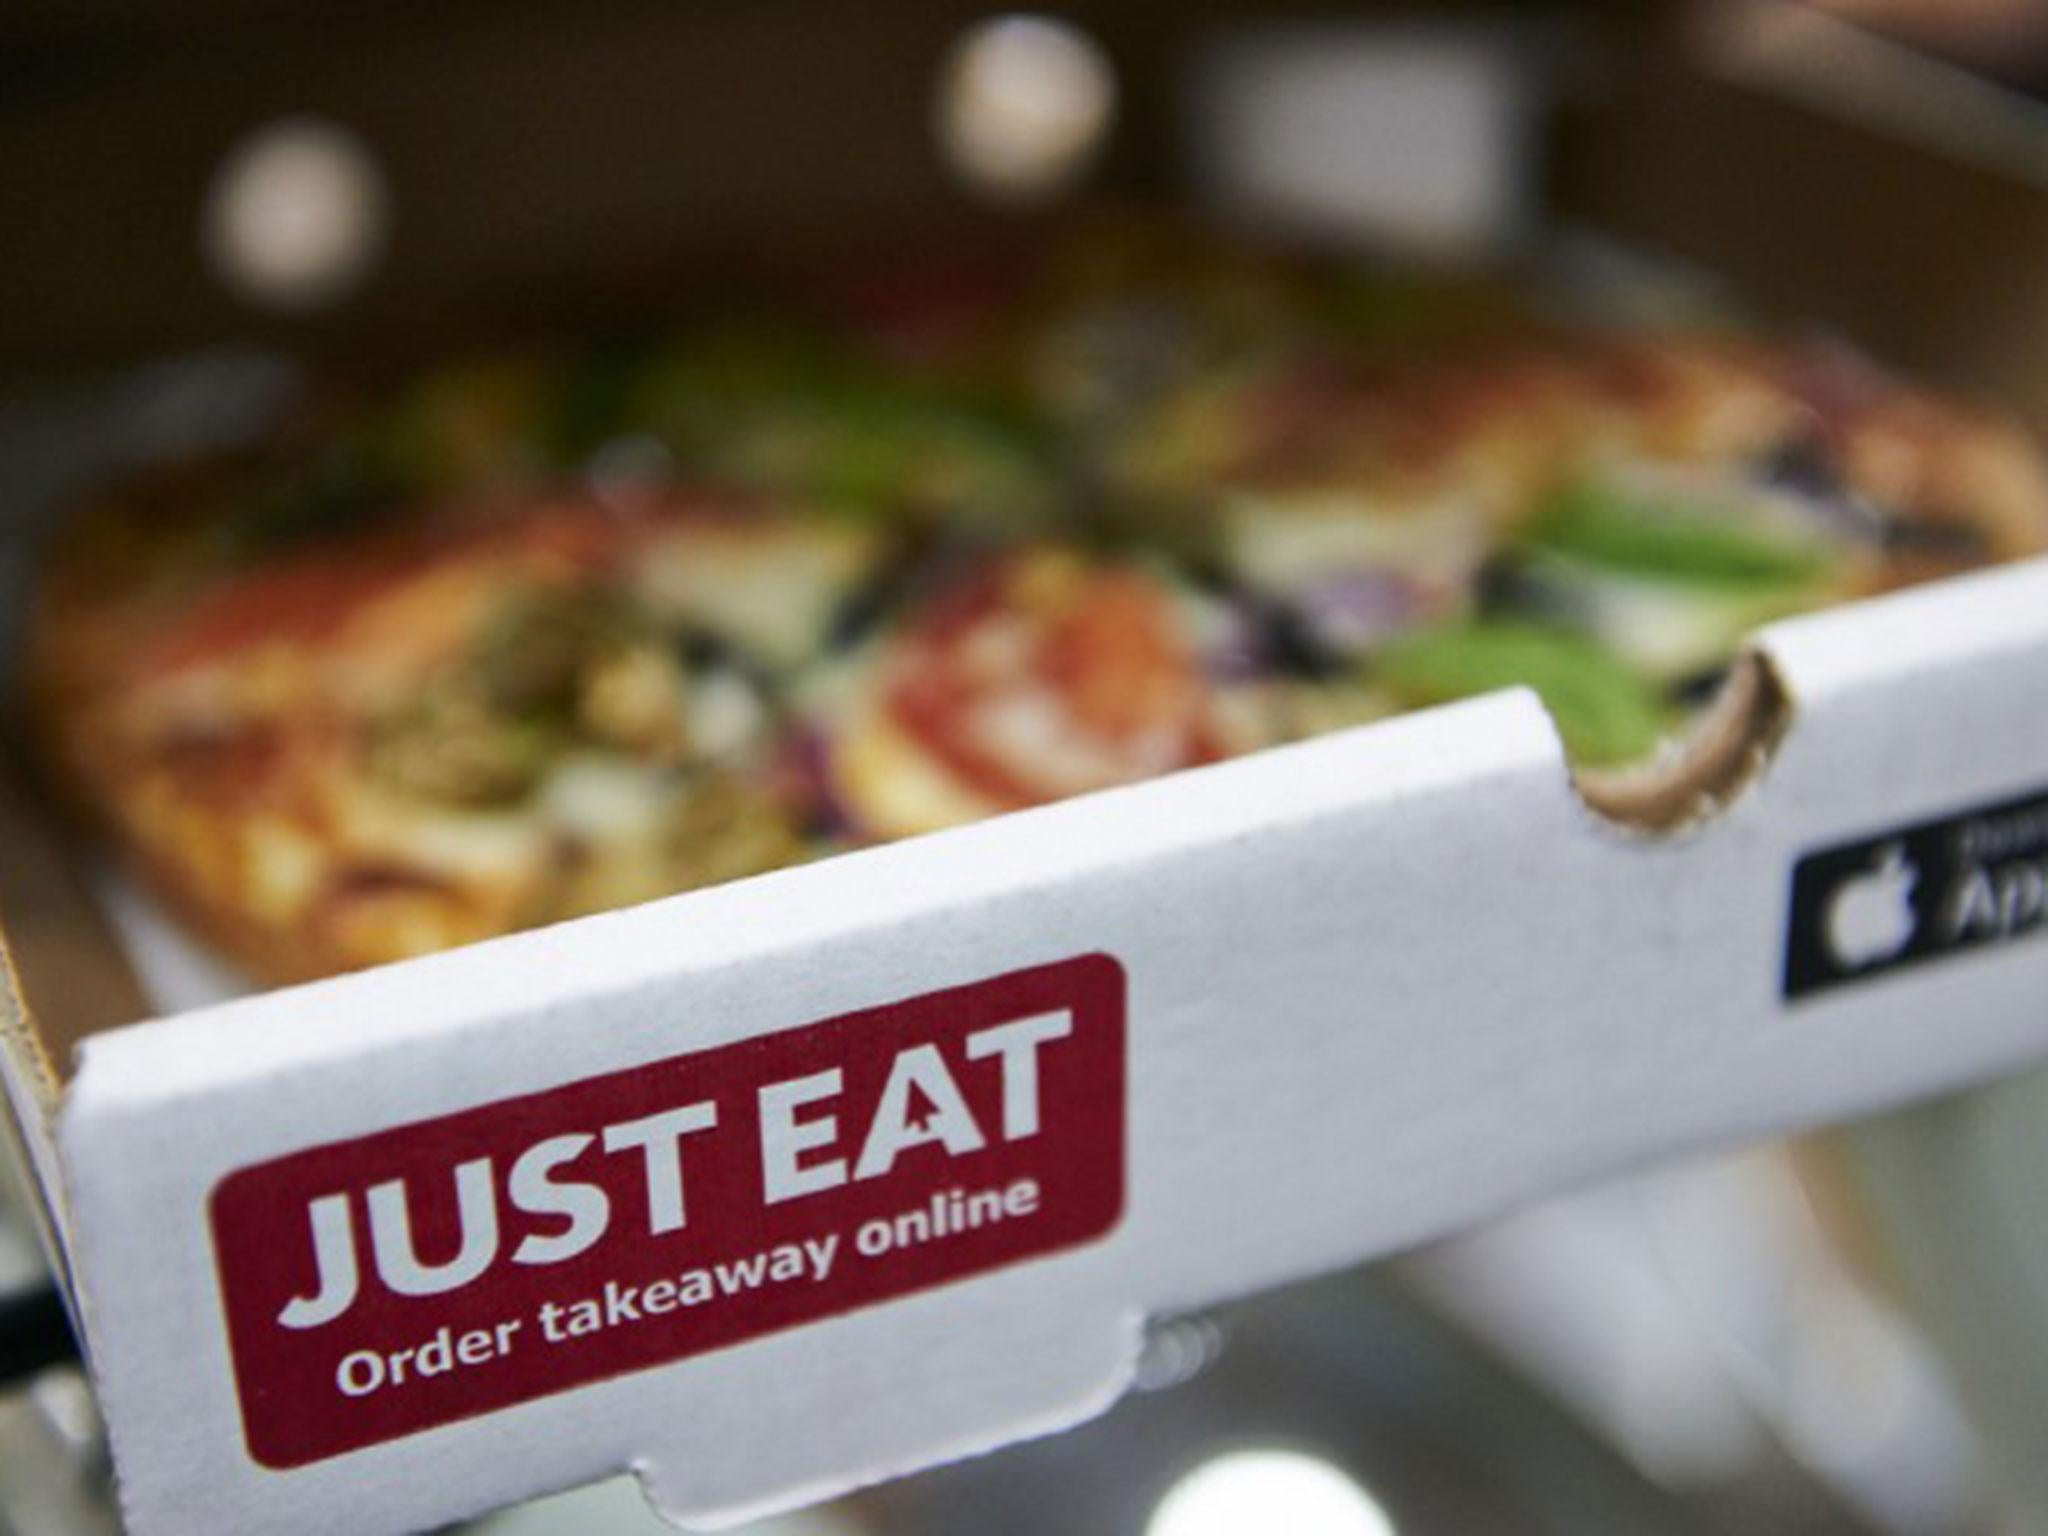 Founded in 2001, Just Eat is now valued at £5bn